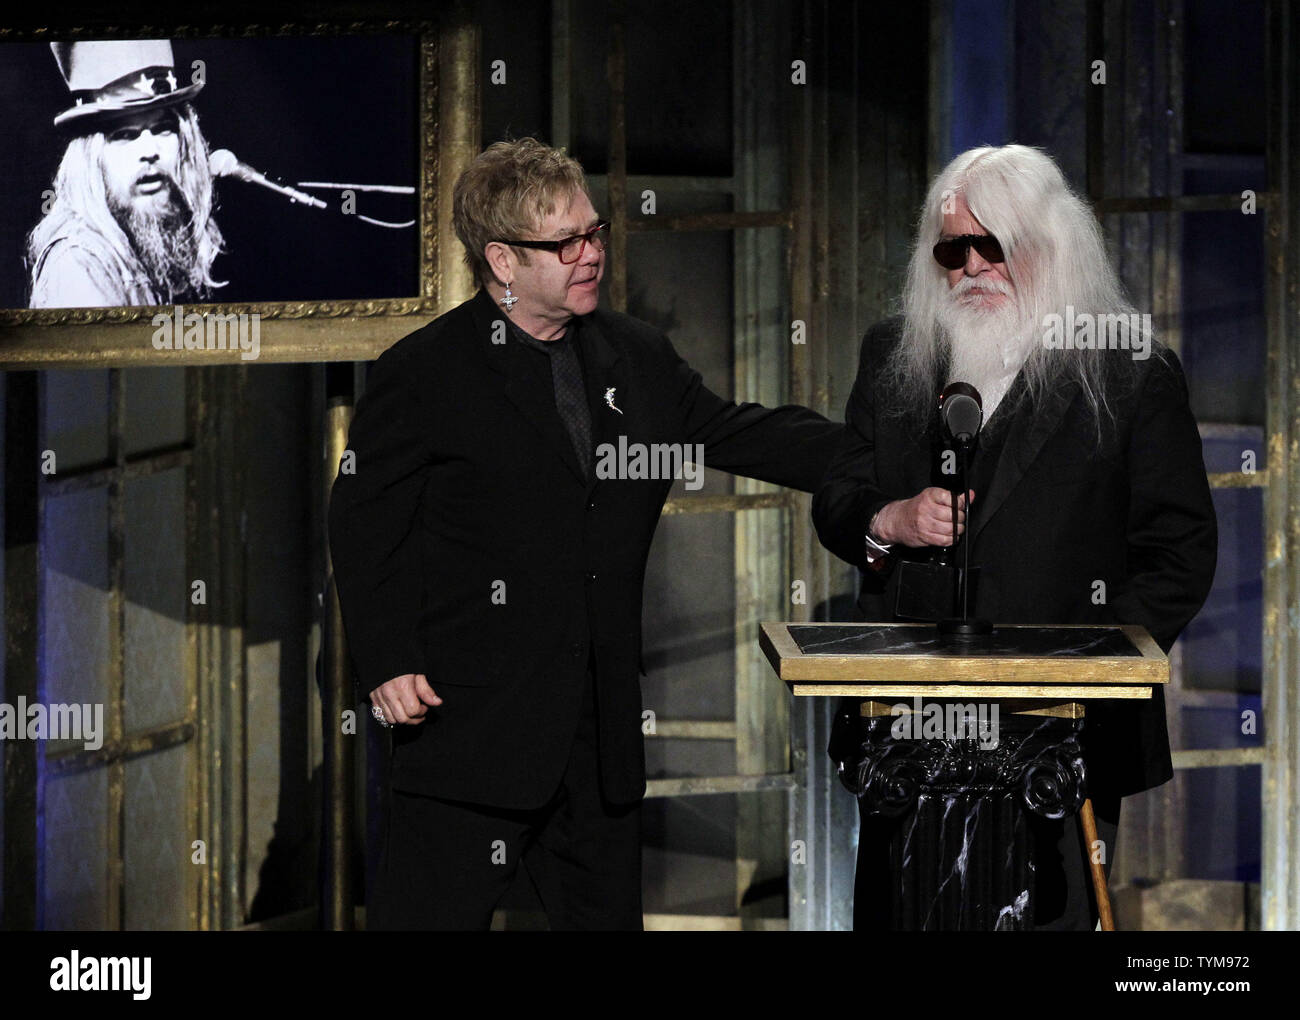 Elton John gets emotional as Leon Russell gets inducted into the Rock and Roll Hall of Fame at the Waldorf Astoria in New York City on March 14, 2011.  UPI/John Angelillo Stock Photo